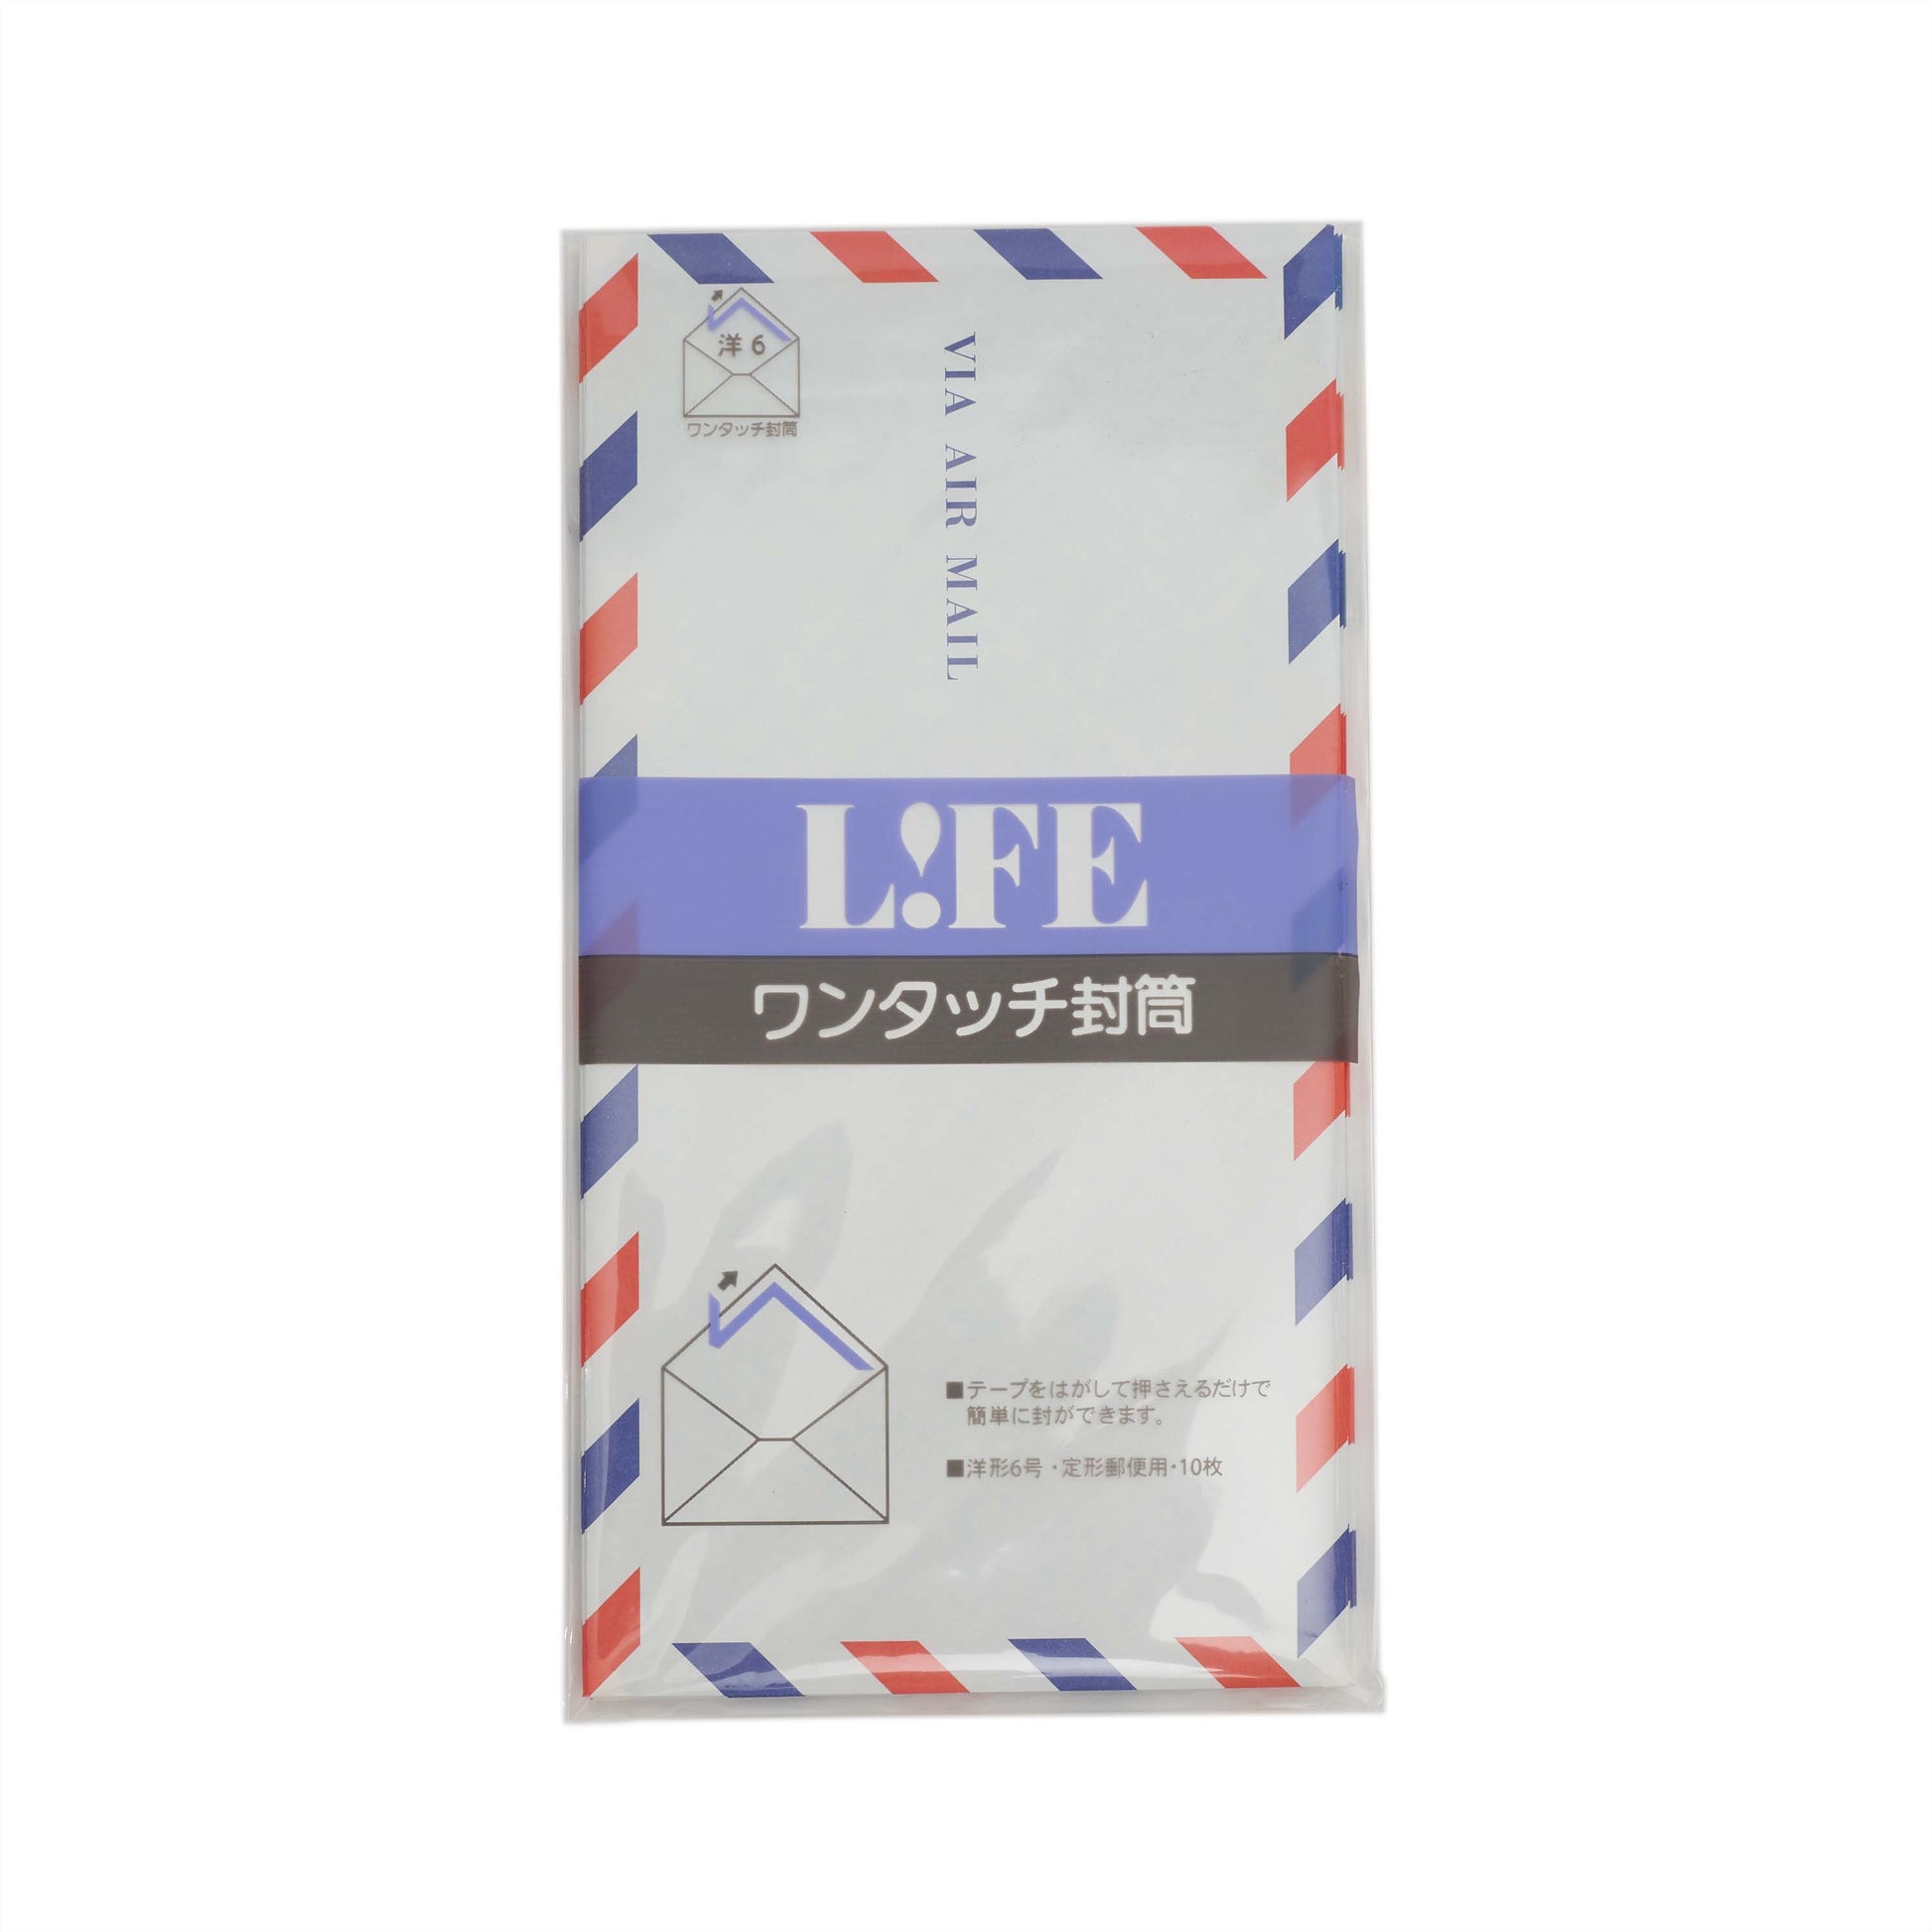 Life Airmail envelopes "via air mail" E26. Red white and blue envelopes package